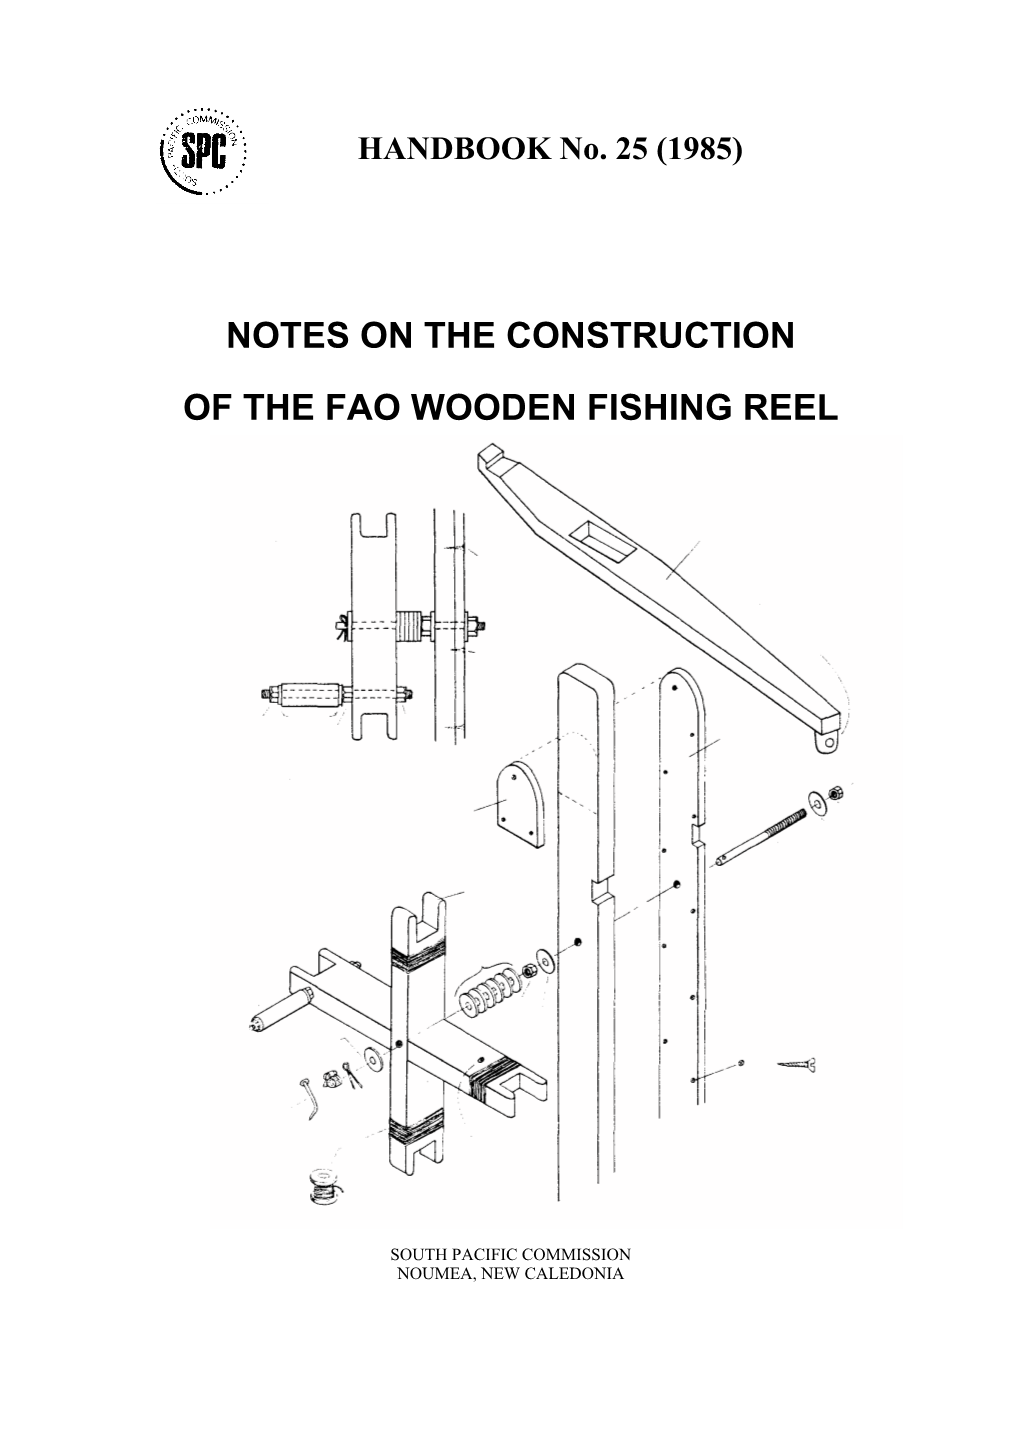 Notes on the Construction of the FAO Wooden Fishing Reel [By Hamish Mckenzie and Others]